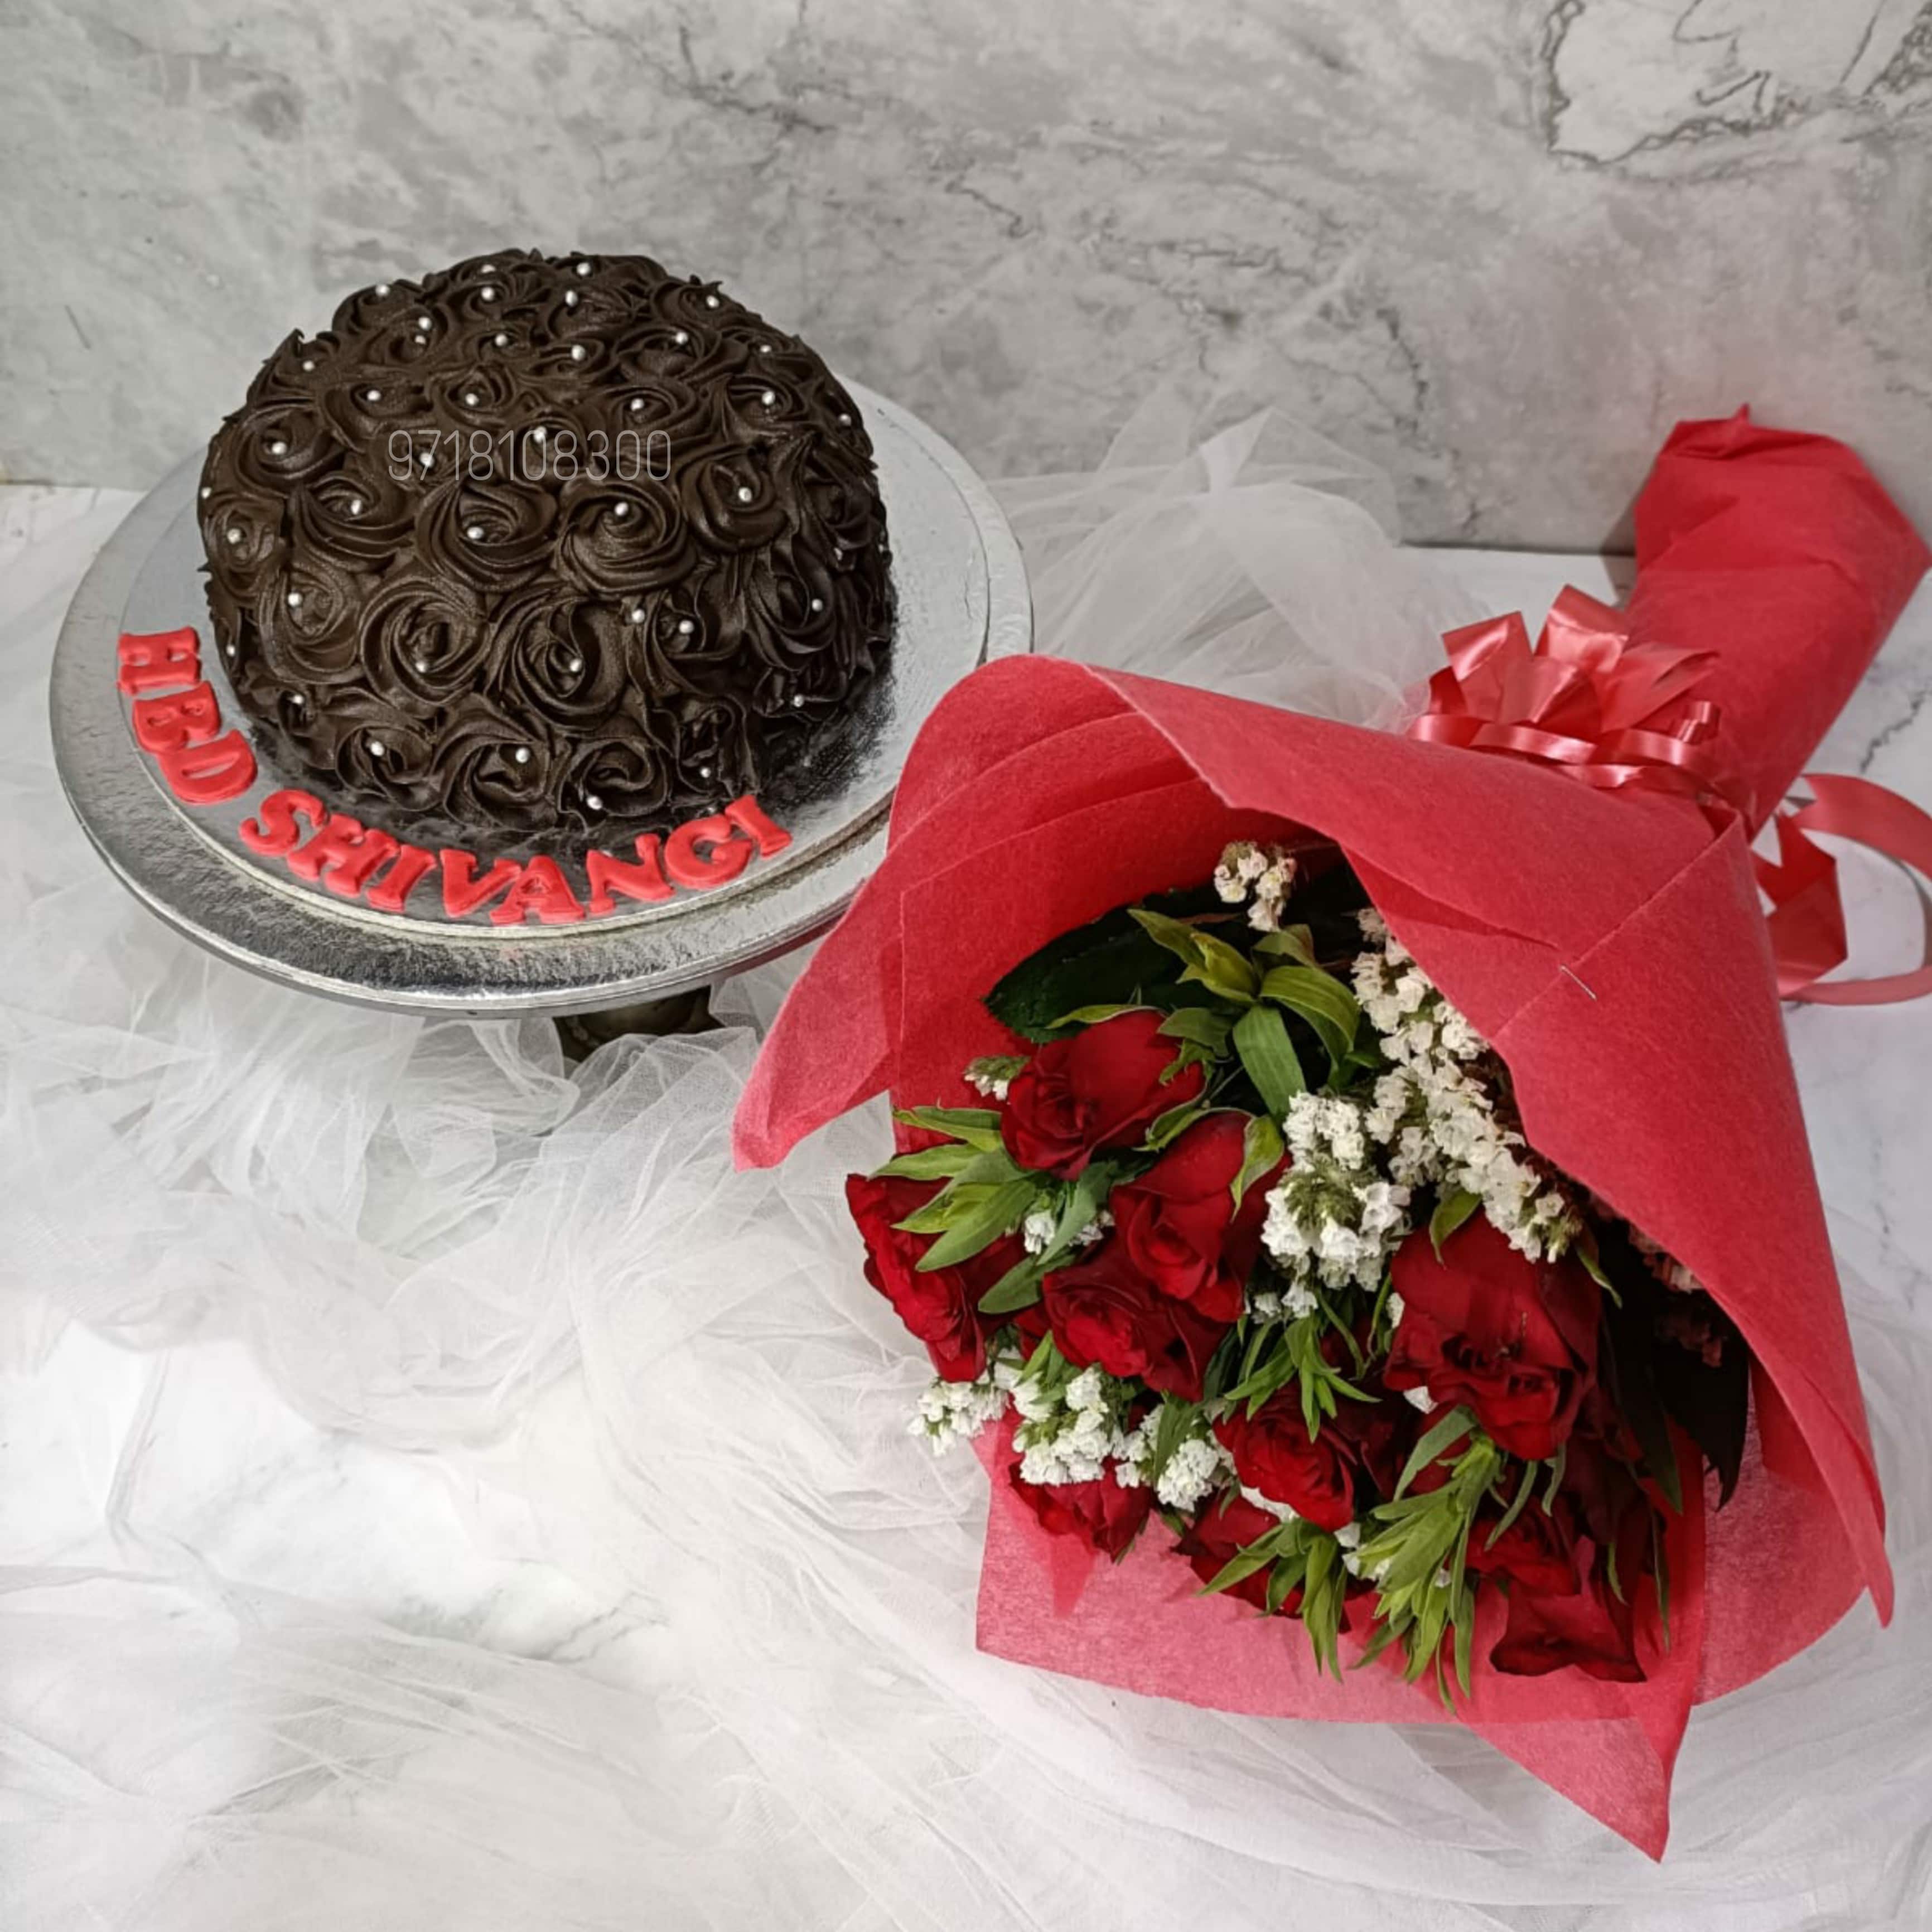 https://www.yummycake.co.in/wp-content/uploads/2023/04/Chocolate-Rose-Cake-With-Bouquet.jpg